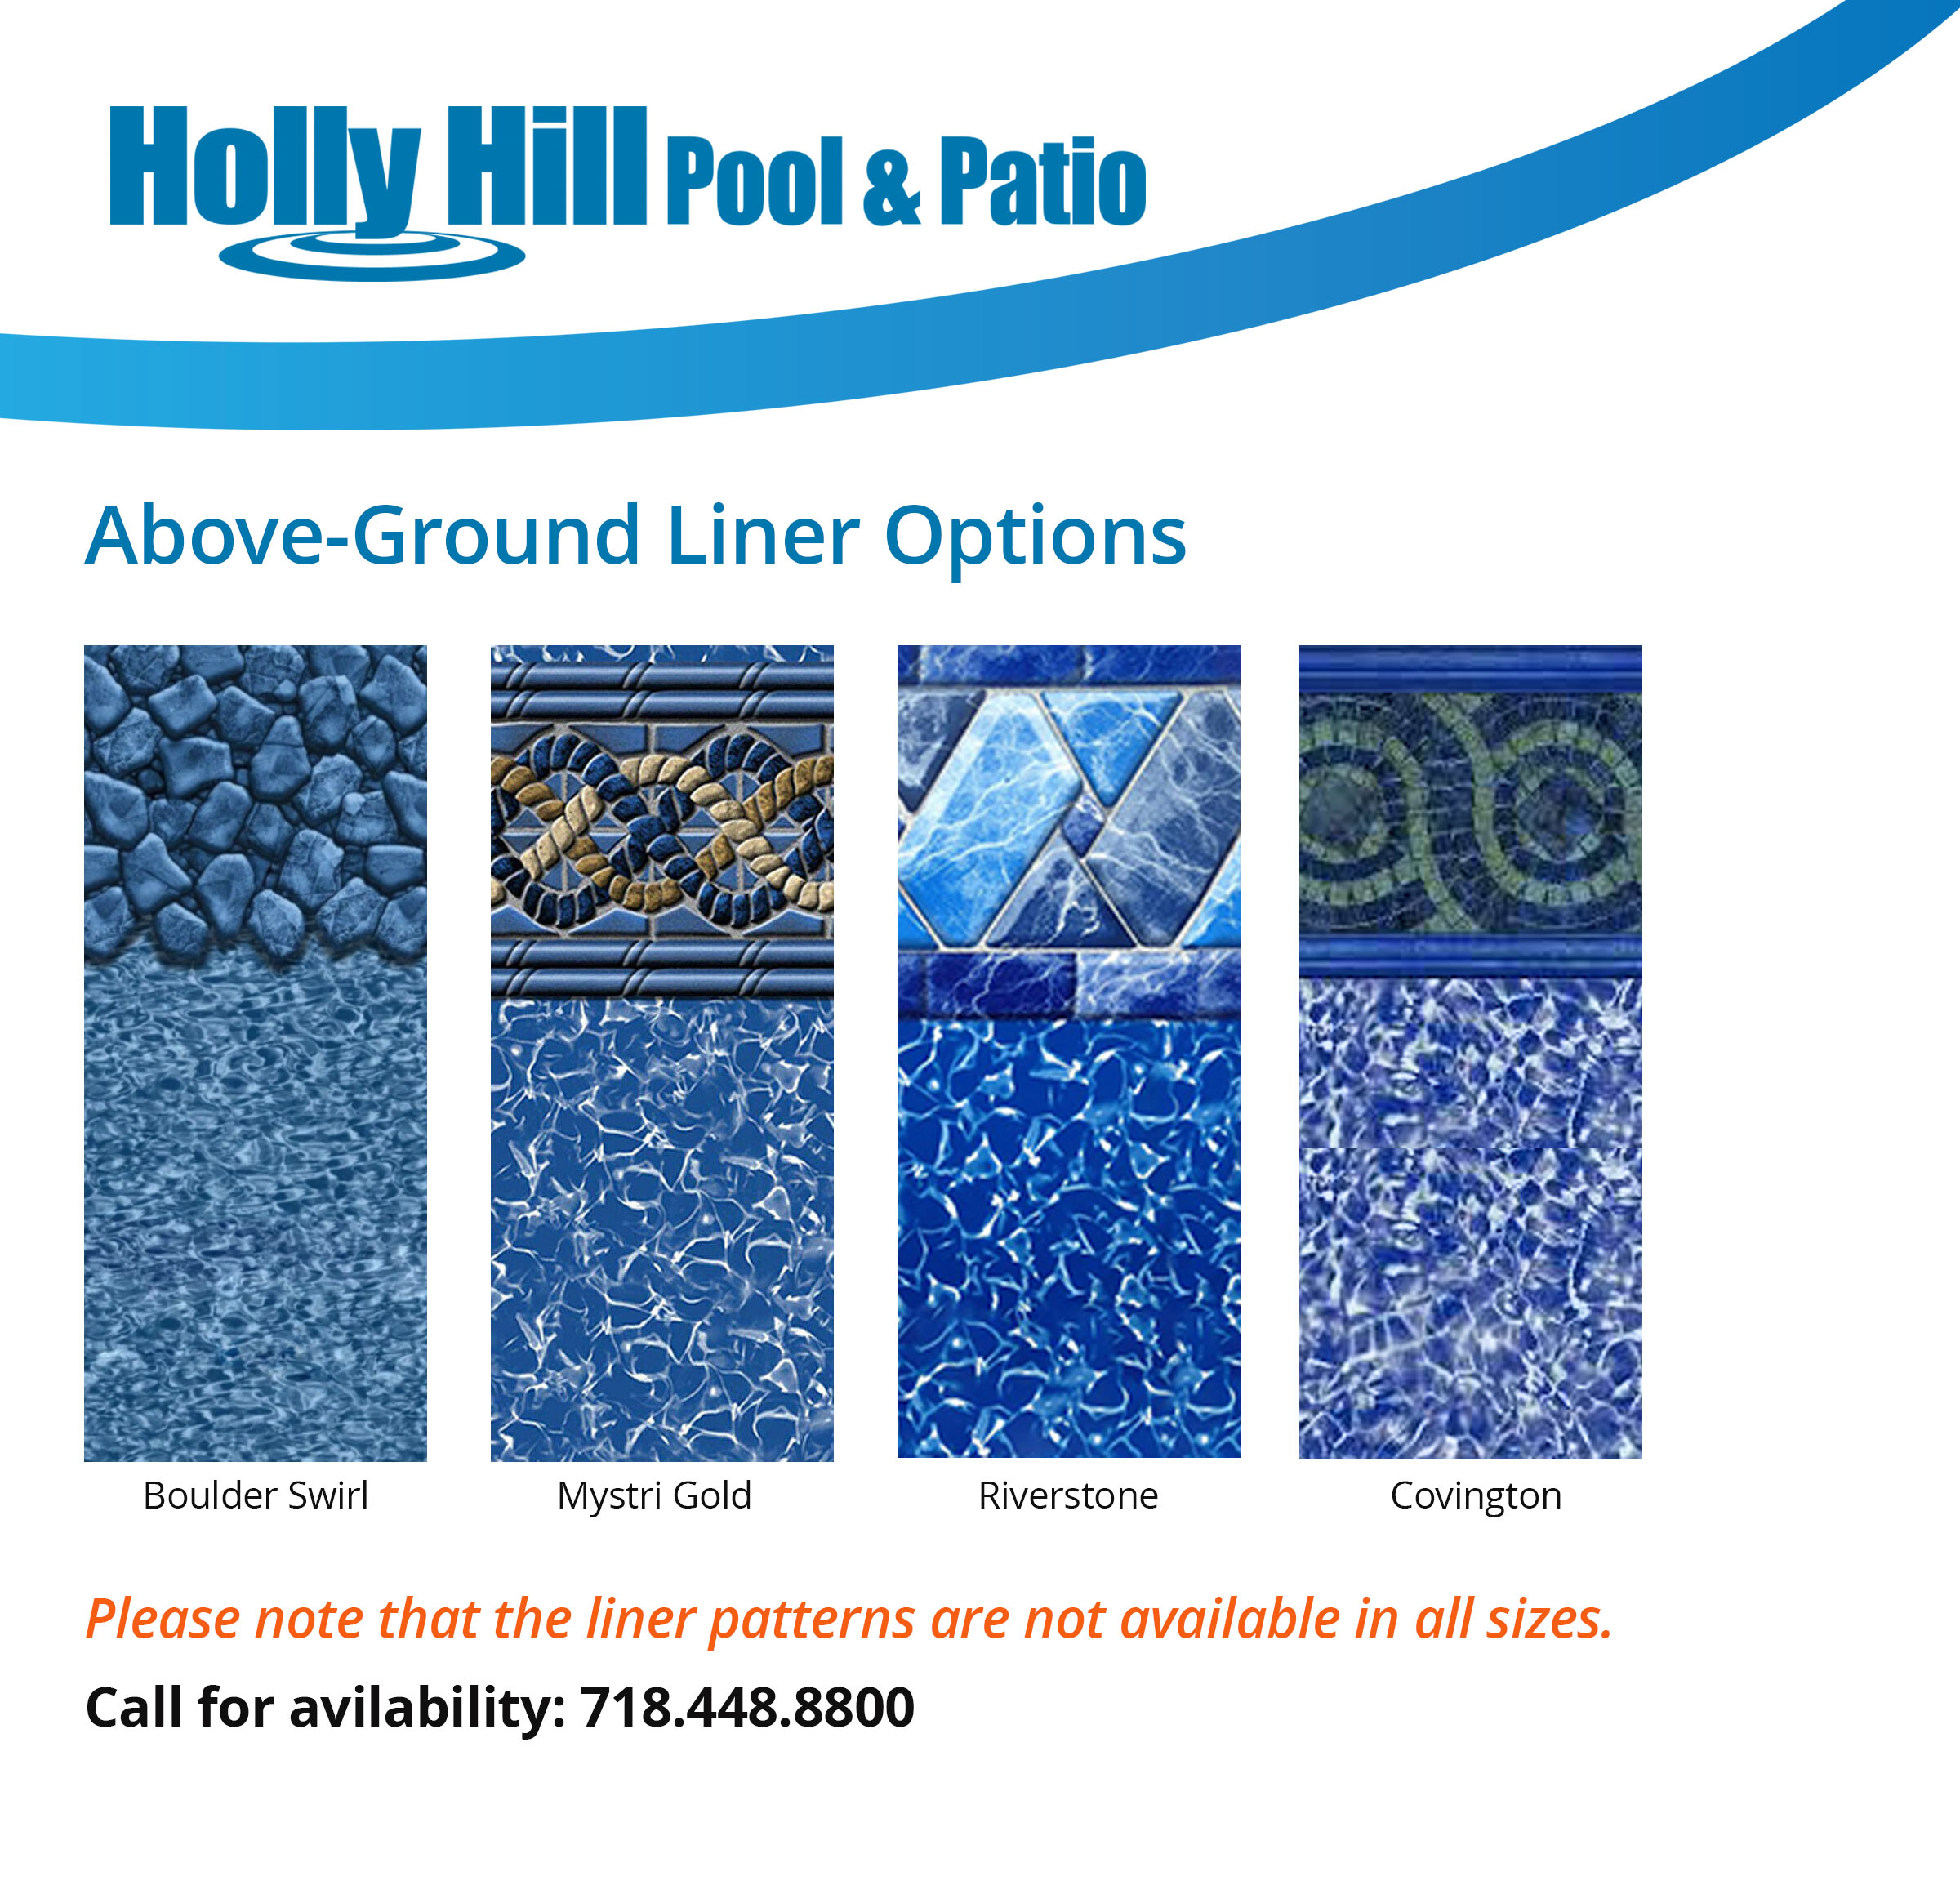 Swimming Pool Liners - Holly Hill Pool & Patio